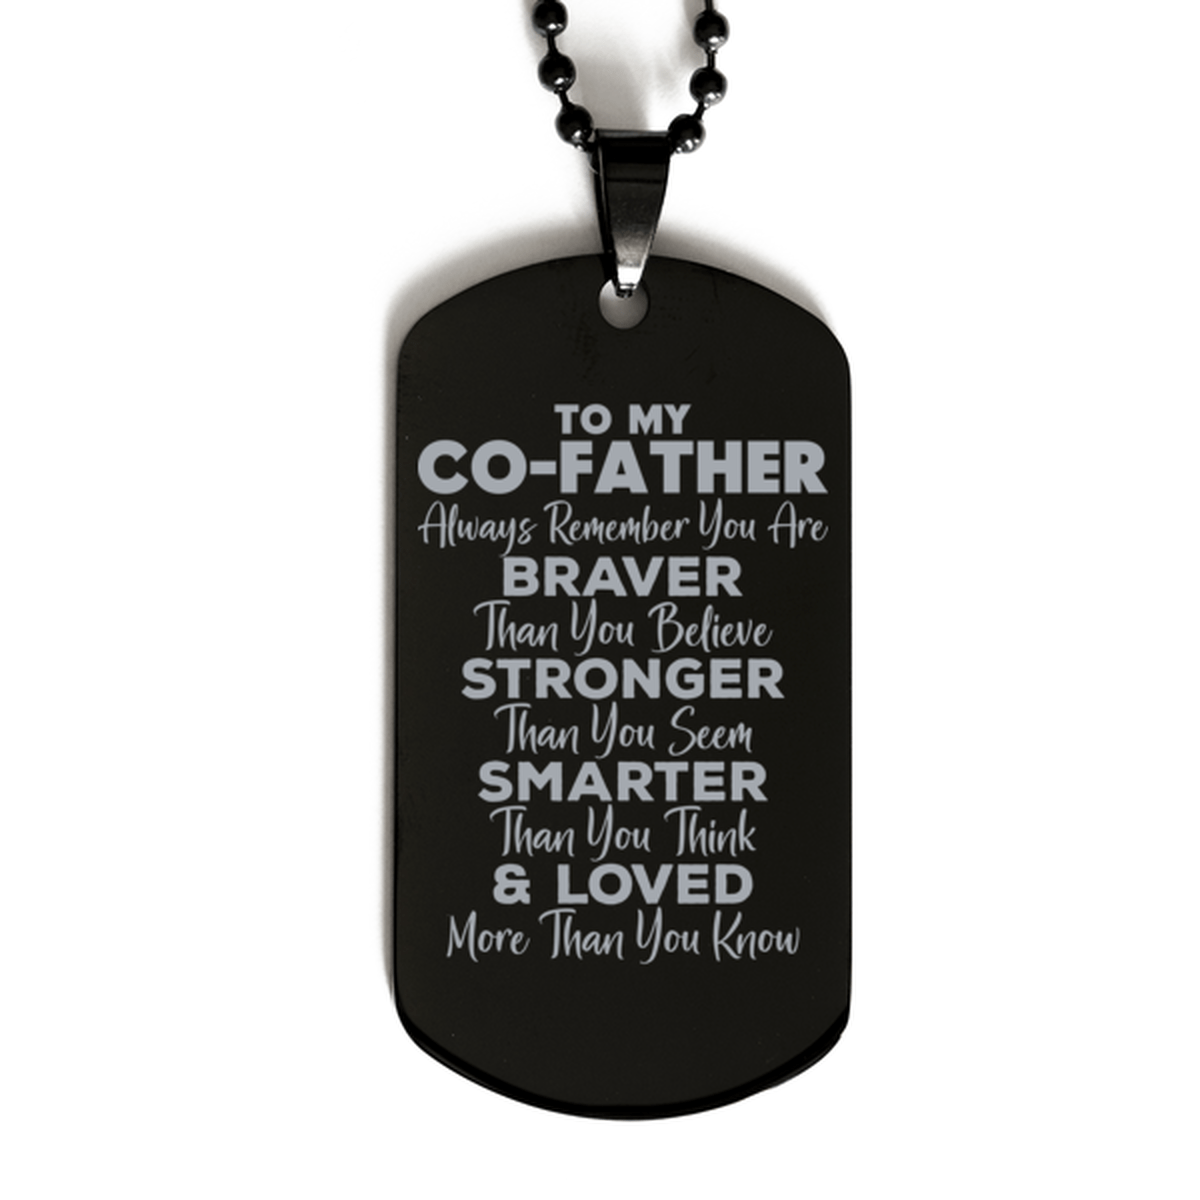 Motivational Co-father Black Dog Tag Necklace, Co-father Always Remember You Are Braver Than You Believe, Best Birthday Gifts for Co-father